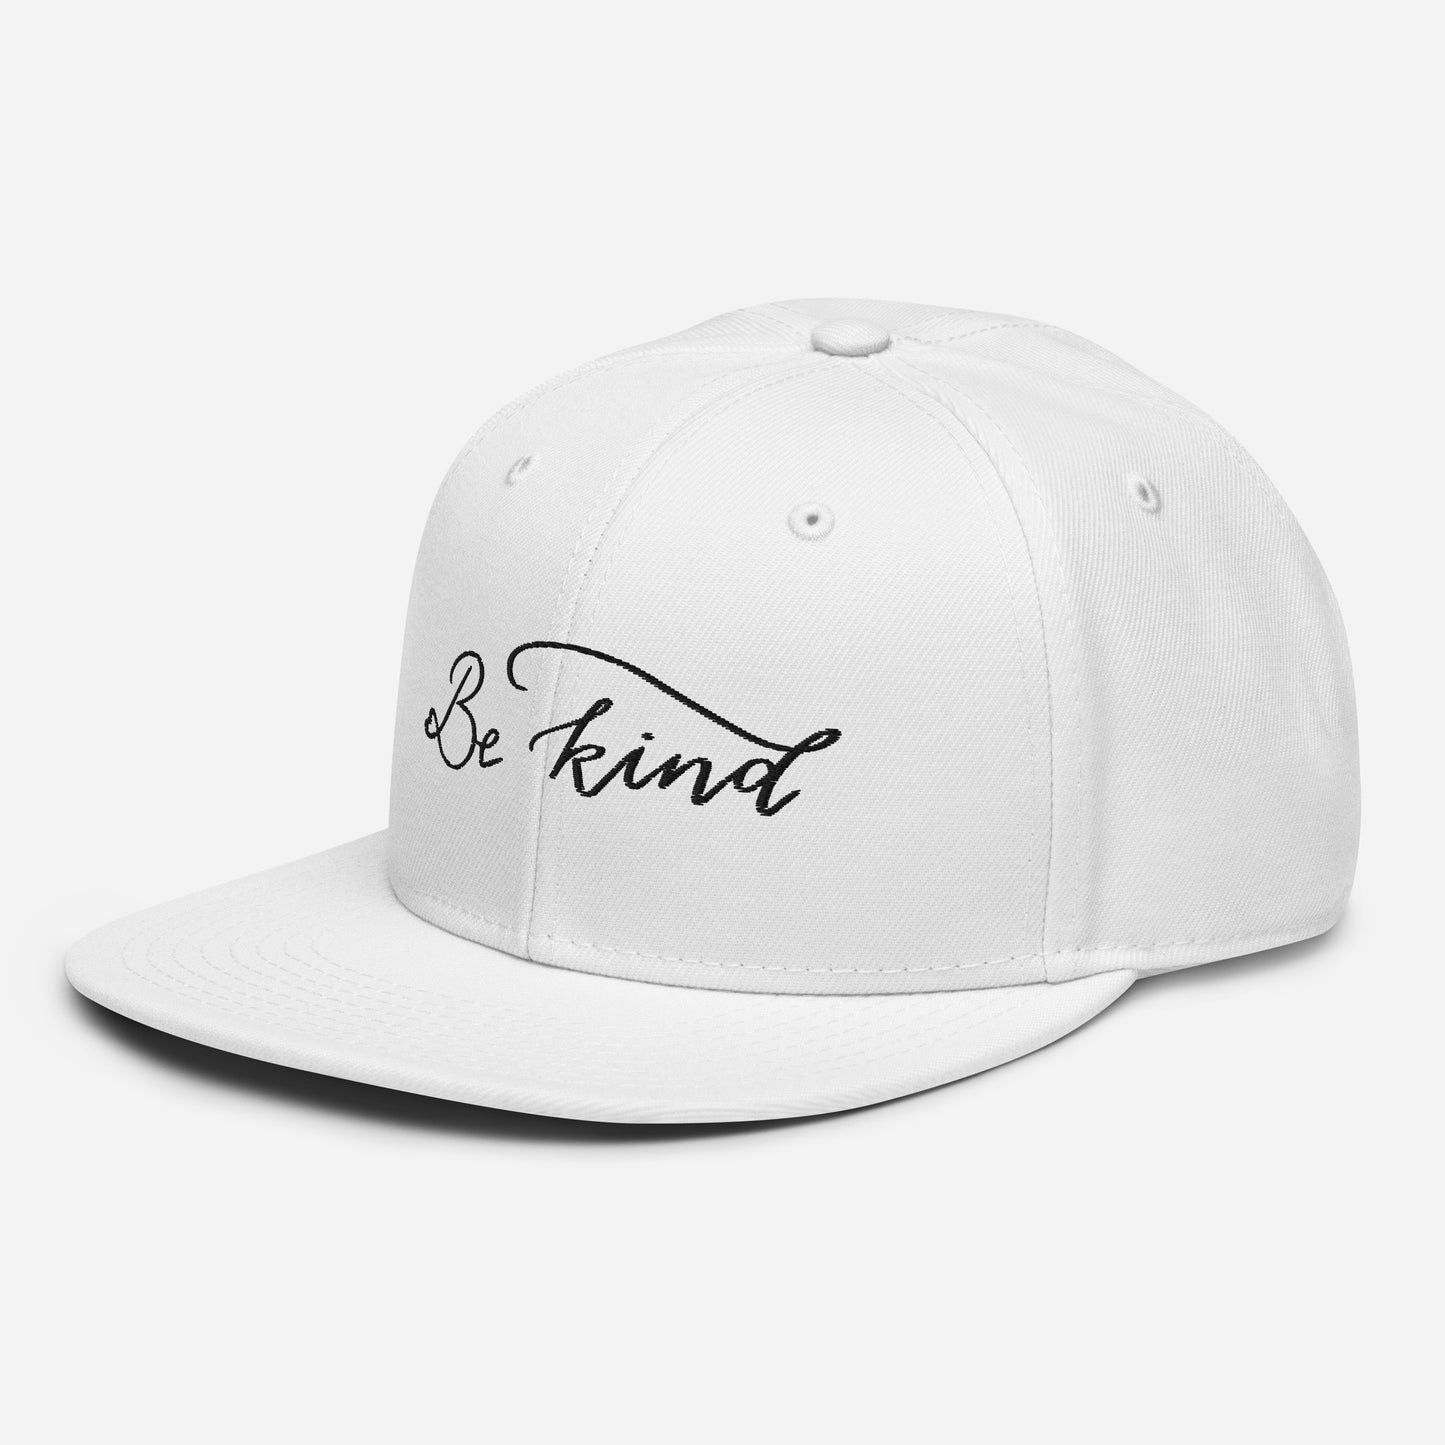 Embroidered snapback hat "Be kind"